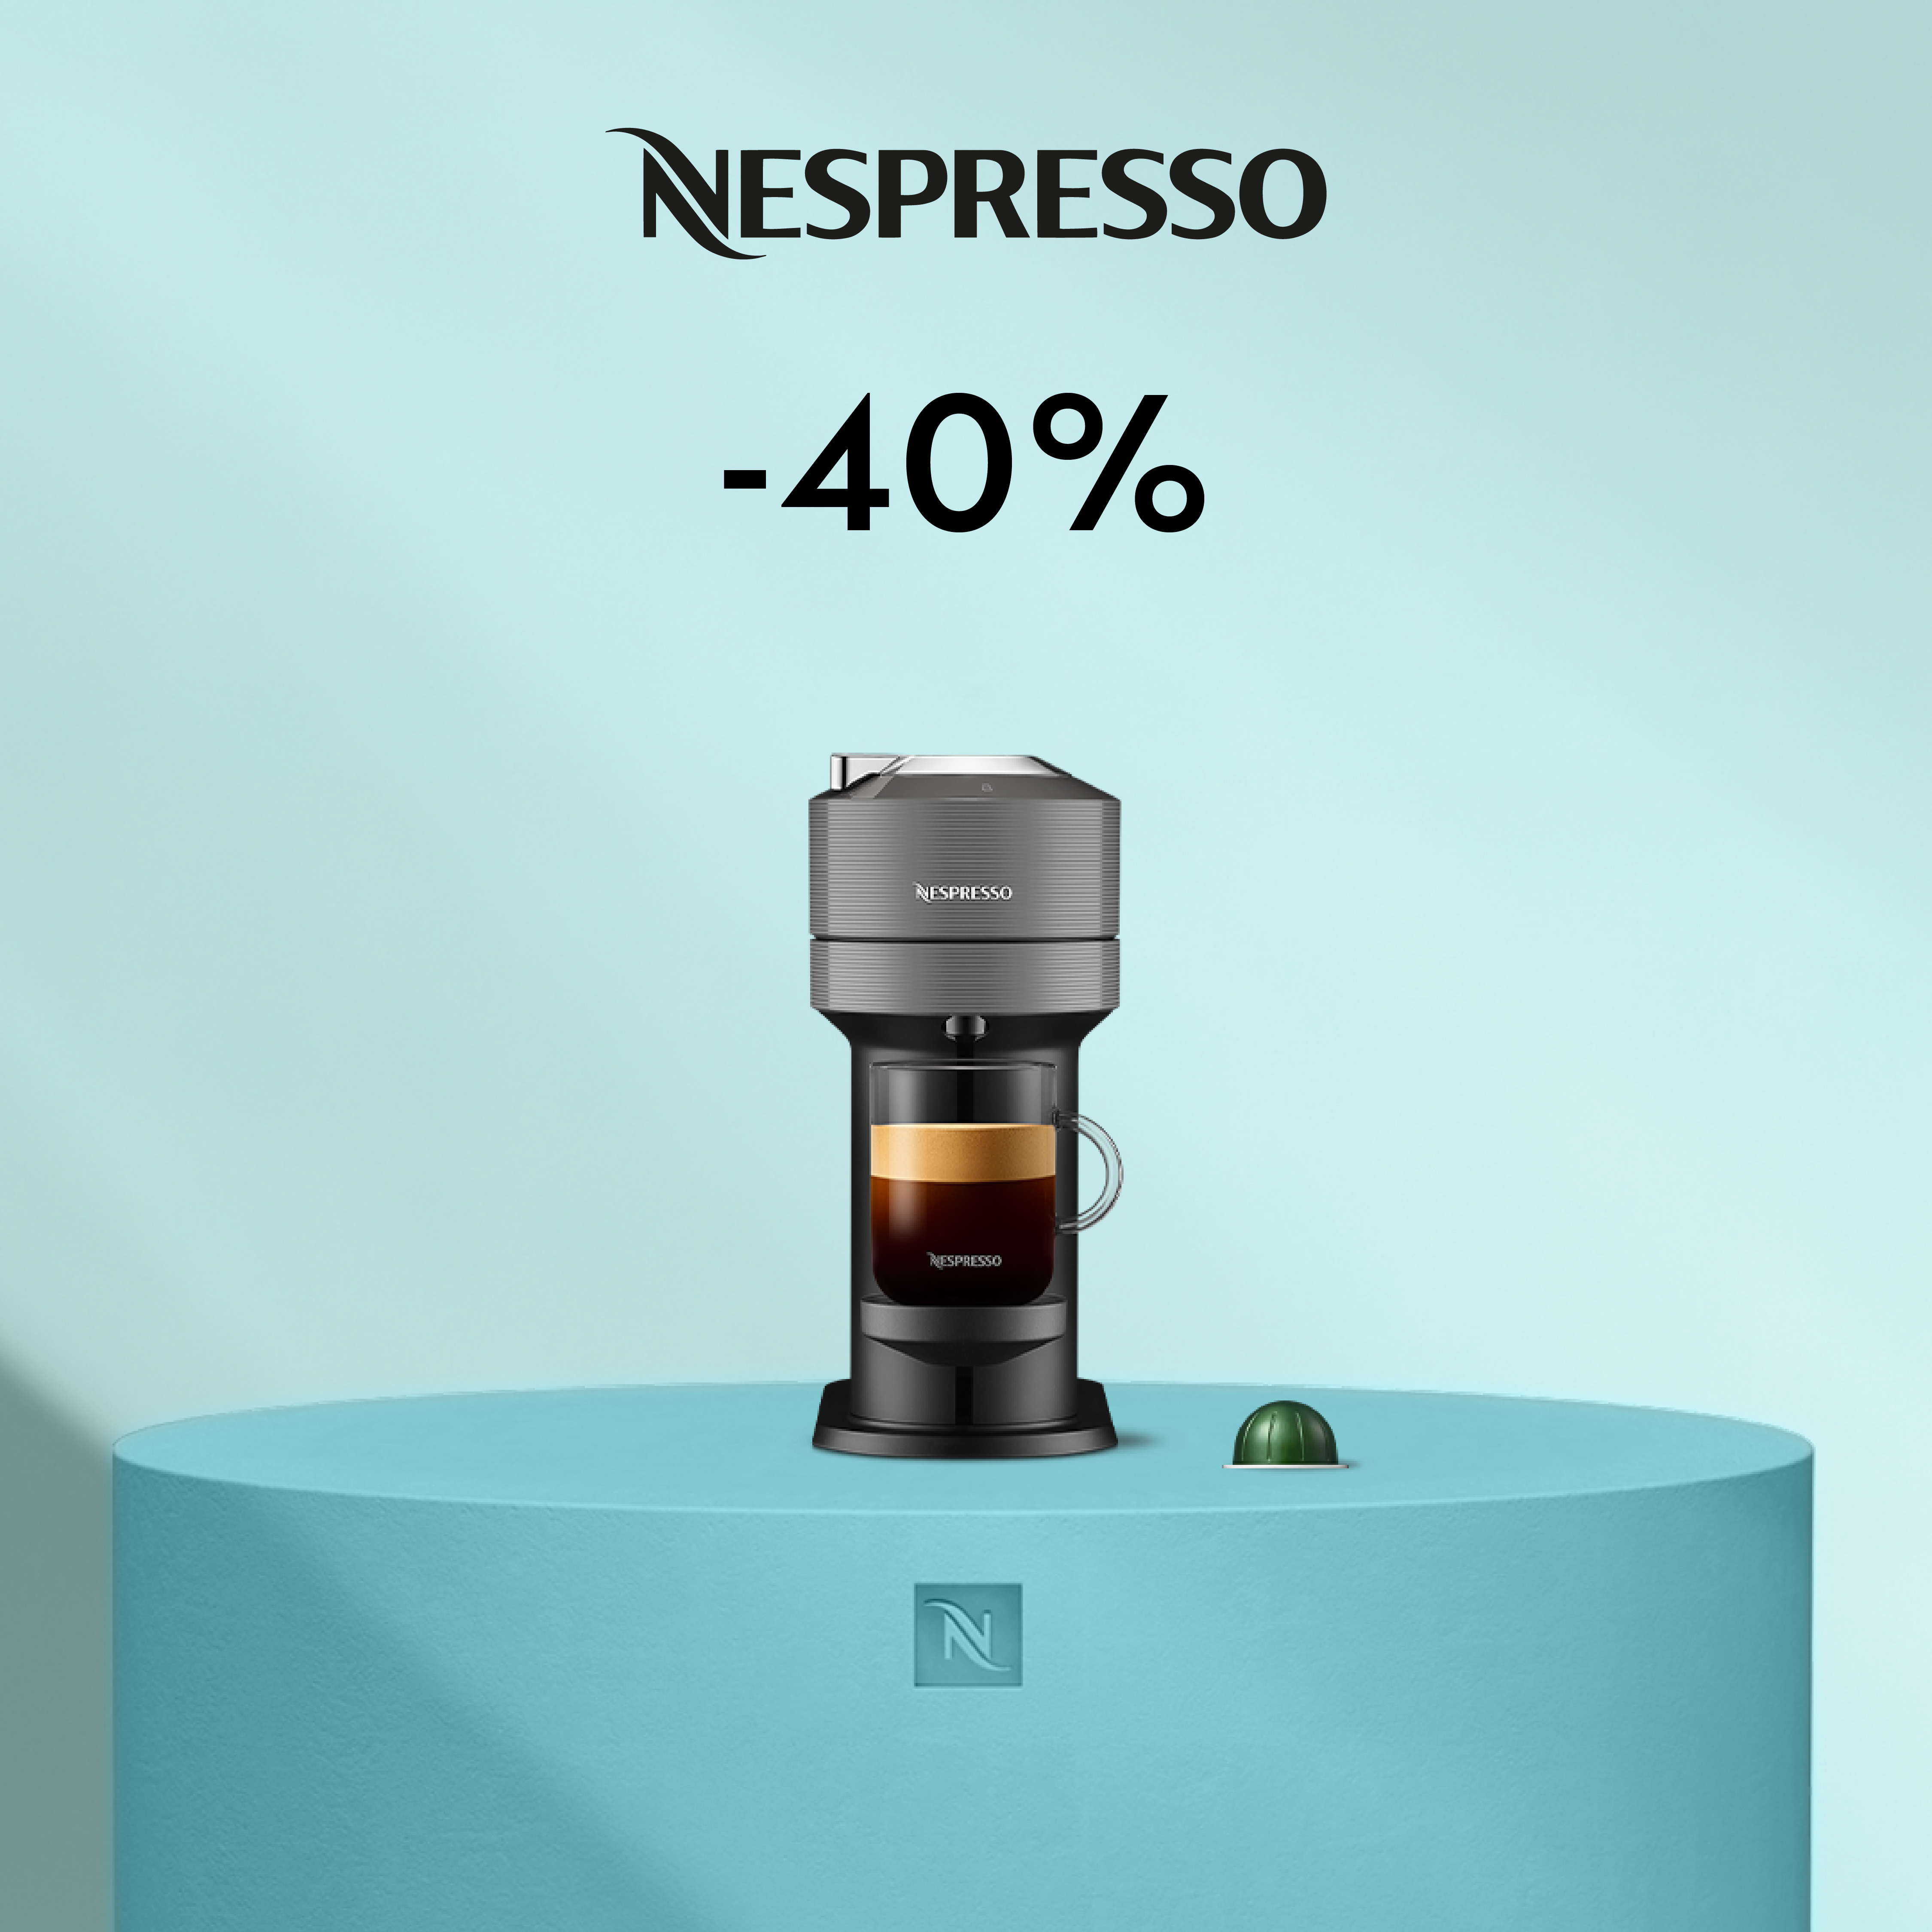 40% DISCOUNT ON THE VERTUO NEXT COFFEE MACHINE WHEN YOU BUY 80 CAPSULES!